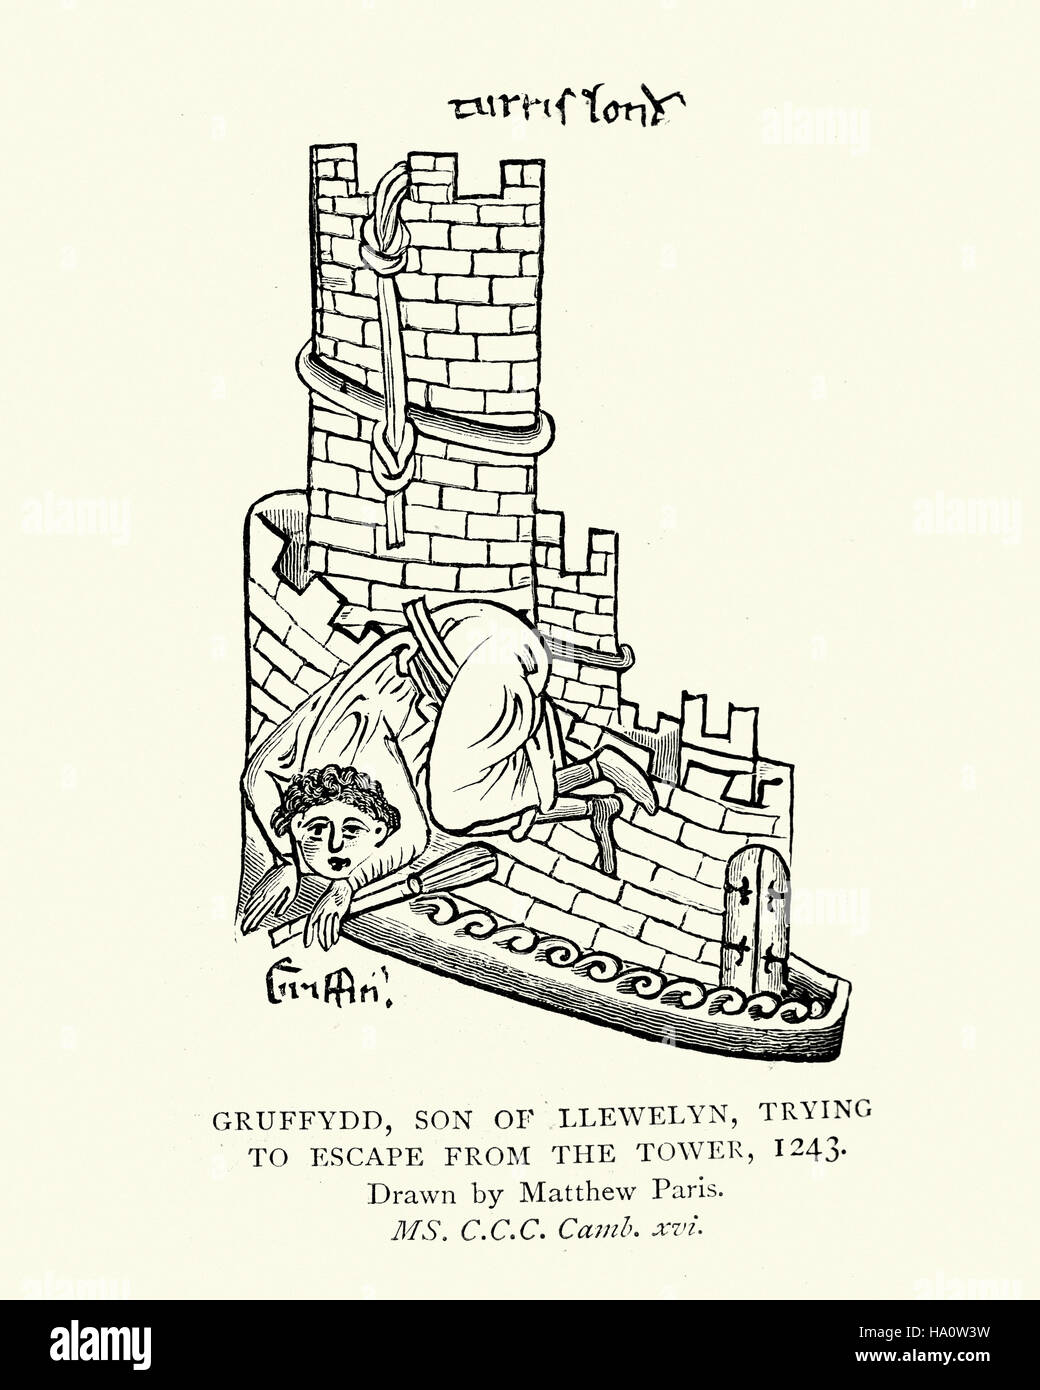 Gruffydd ap Llywelyn Fawr son of Llywelyn the Great trying to escape from the Tower of London in 1243 Stock Photo